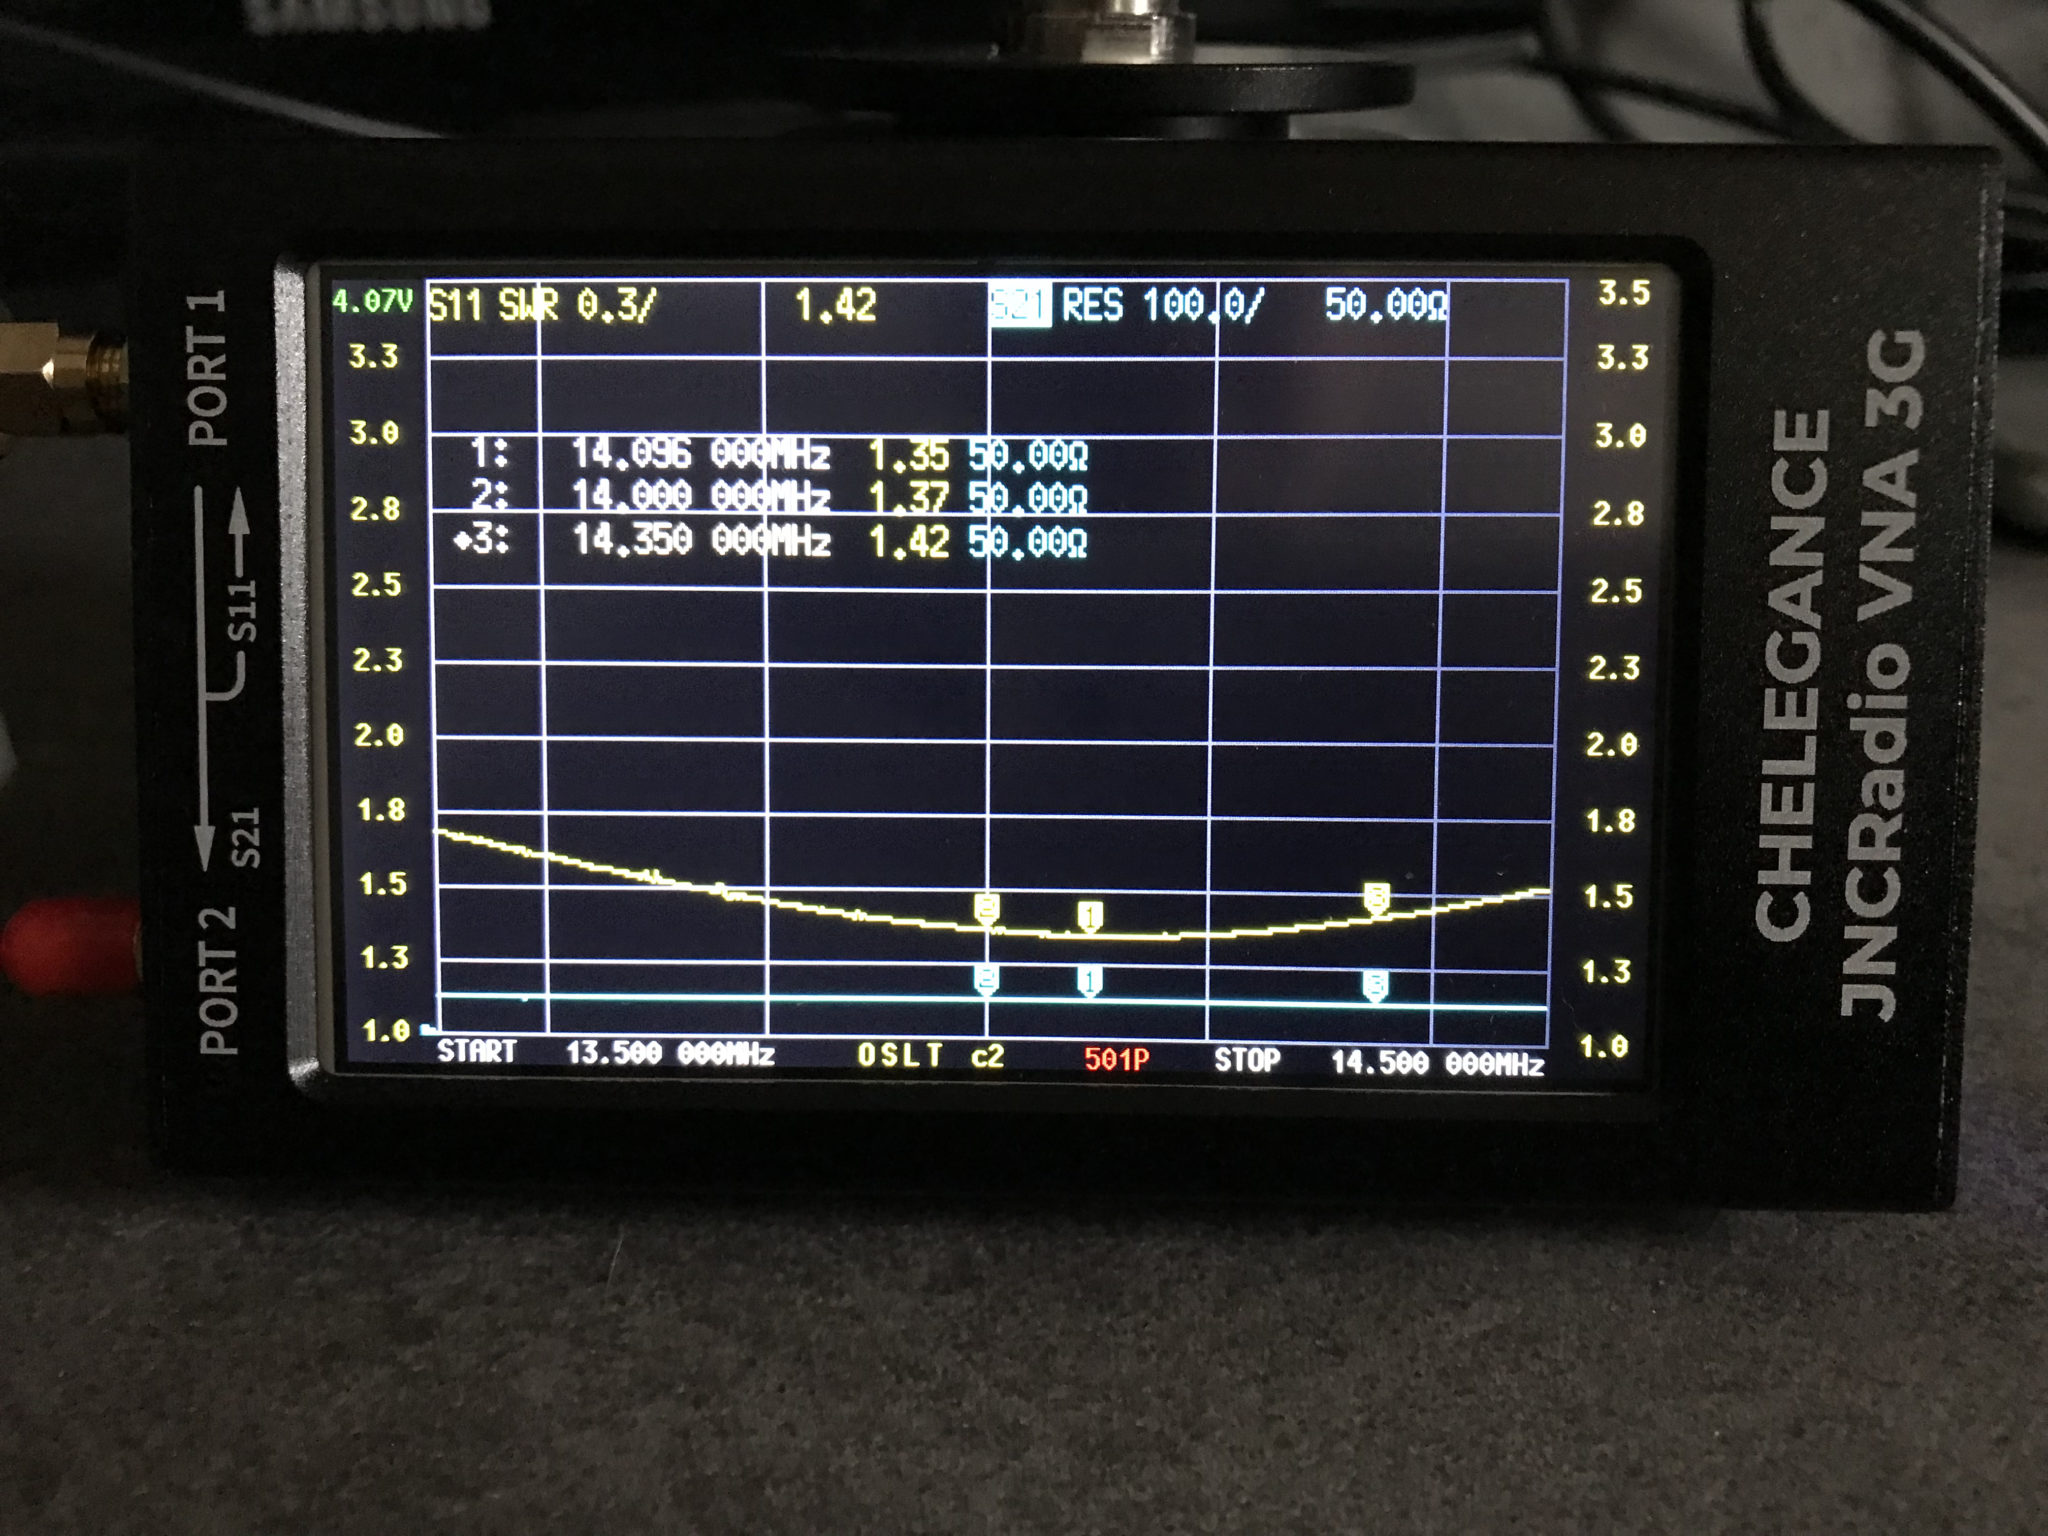 M0AWS 20m Band EFHW Vertical Antenna 13.5MHz - 14.5Mhz SWR Curve